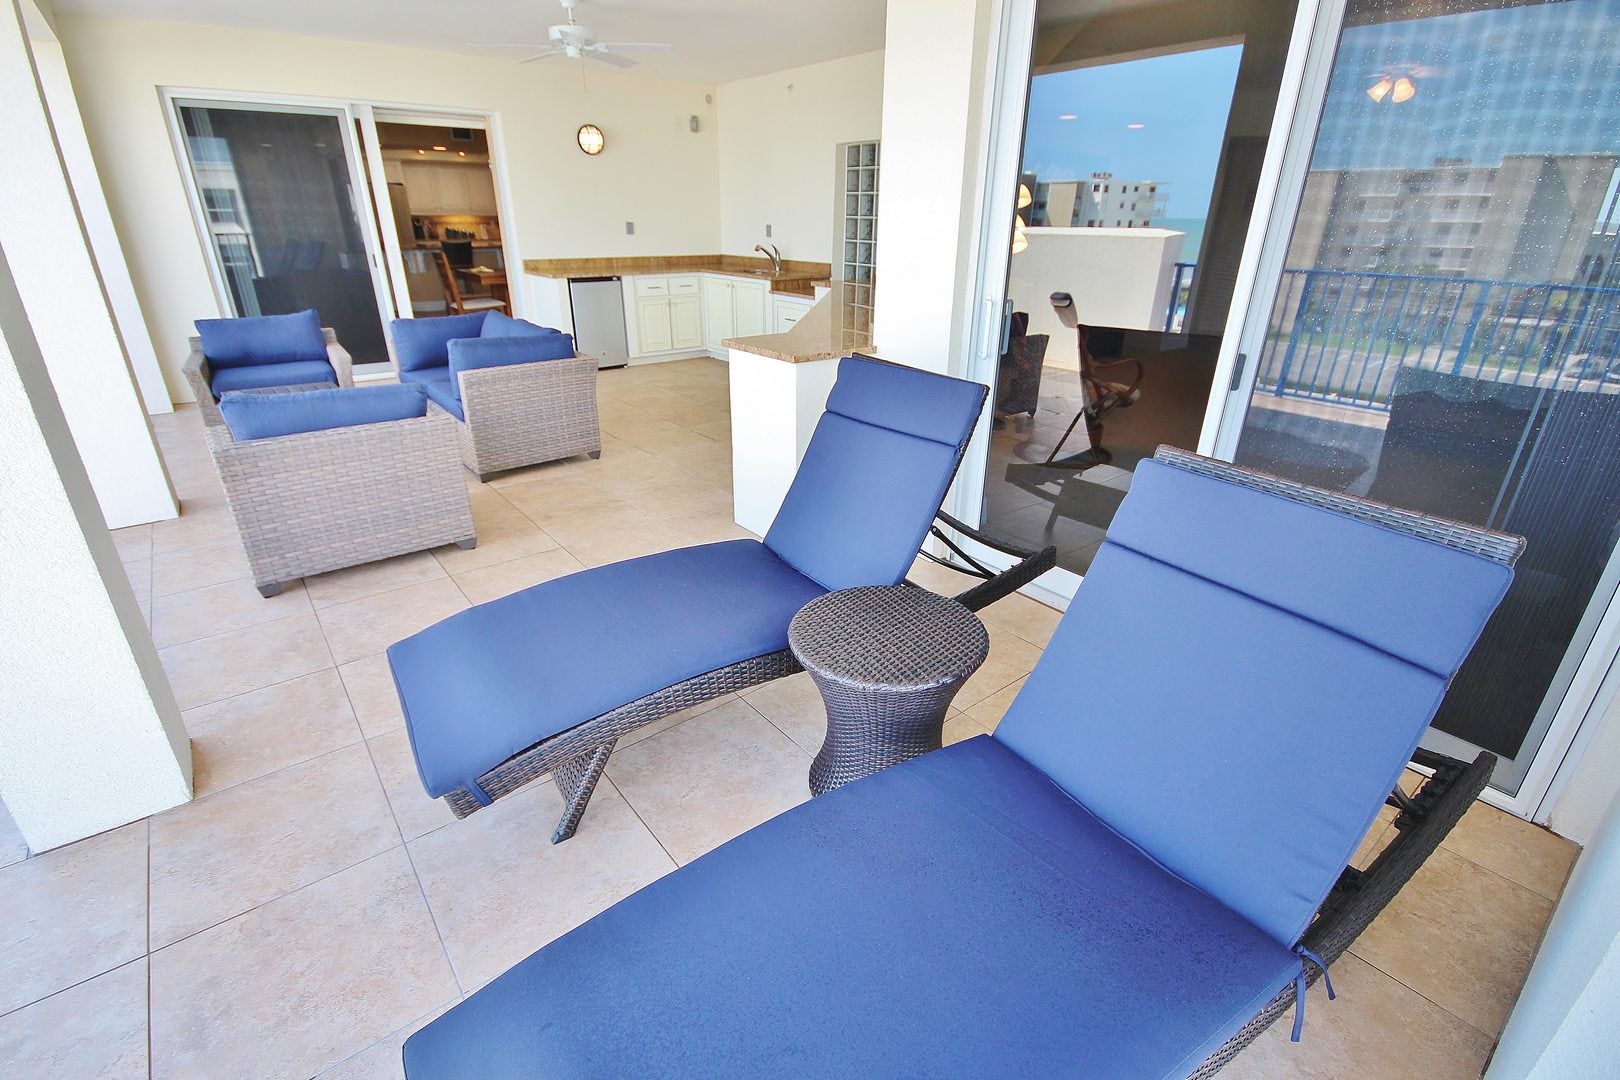 Large balcony area with lounge chairs